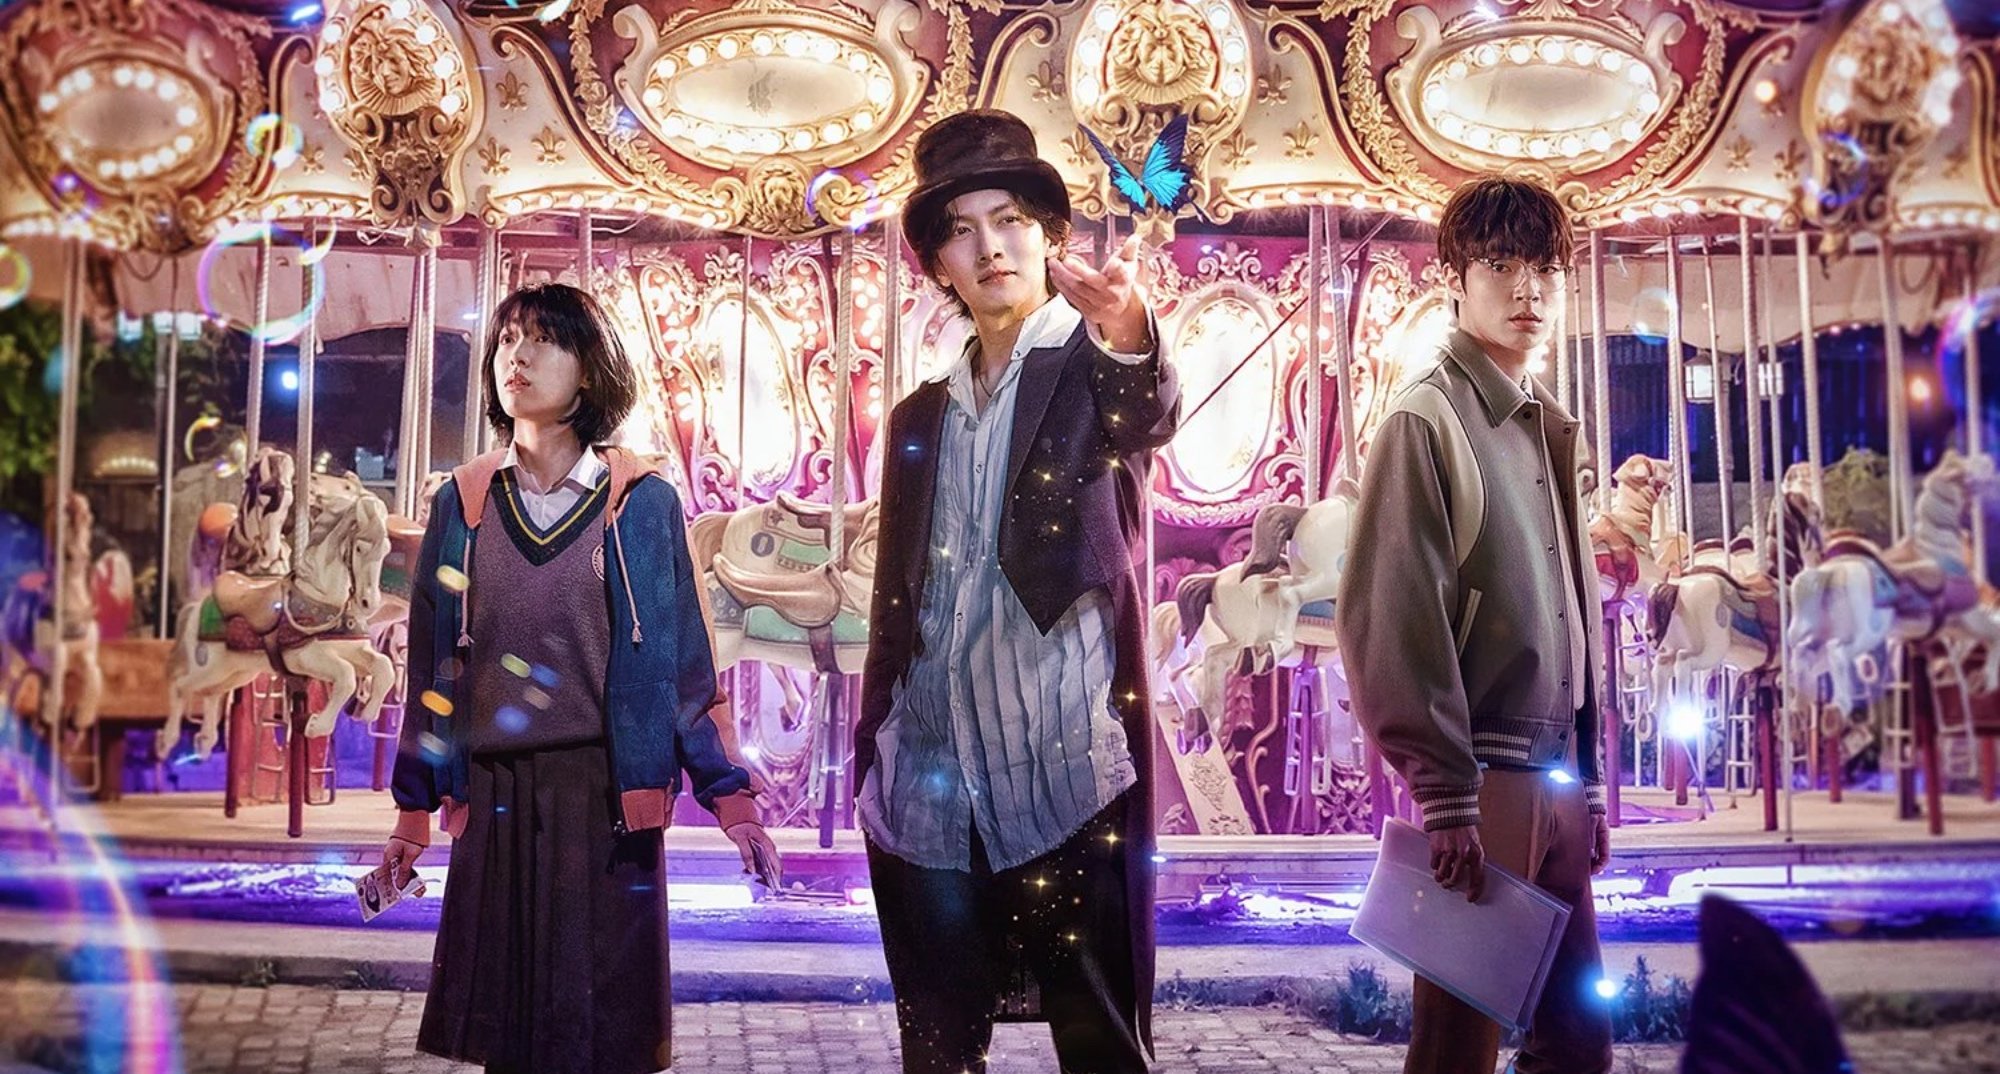 'The Sound of Magic' K-drama and main characters in poster in amusement park.